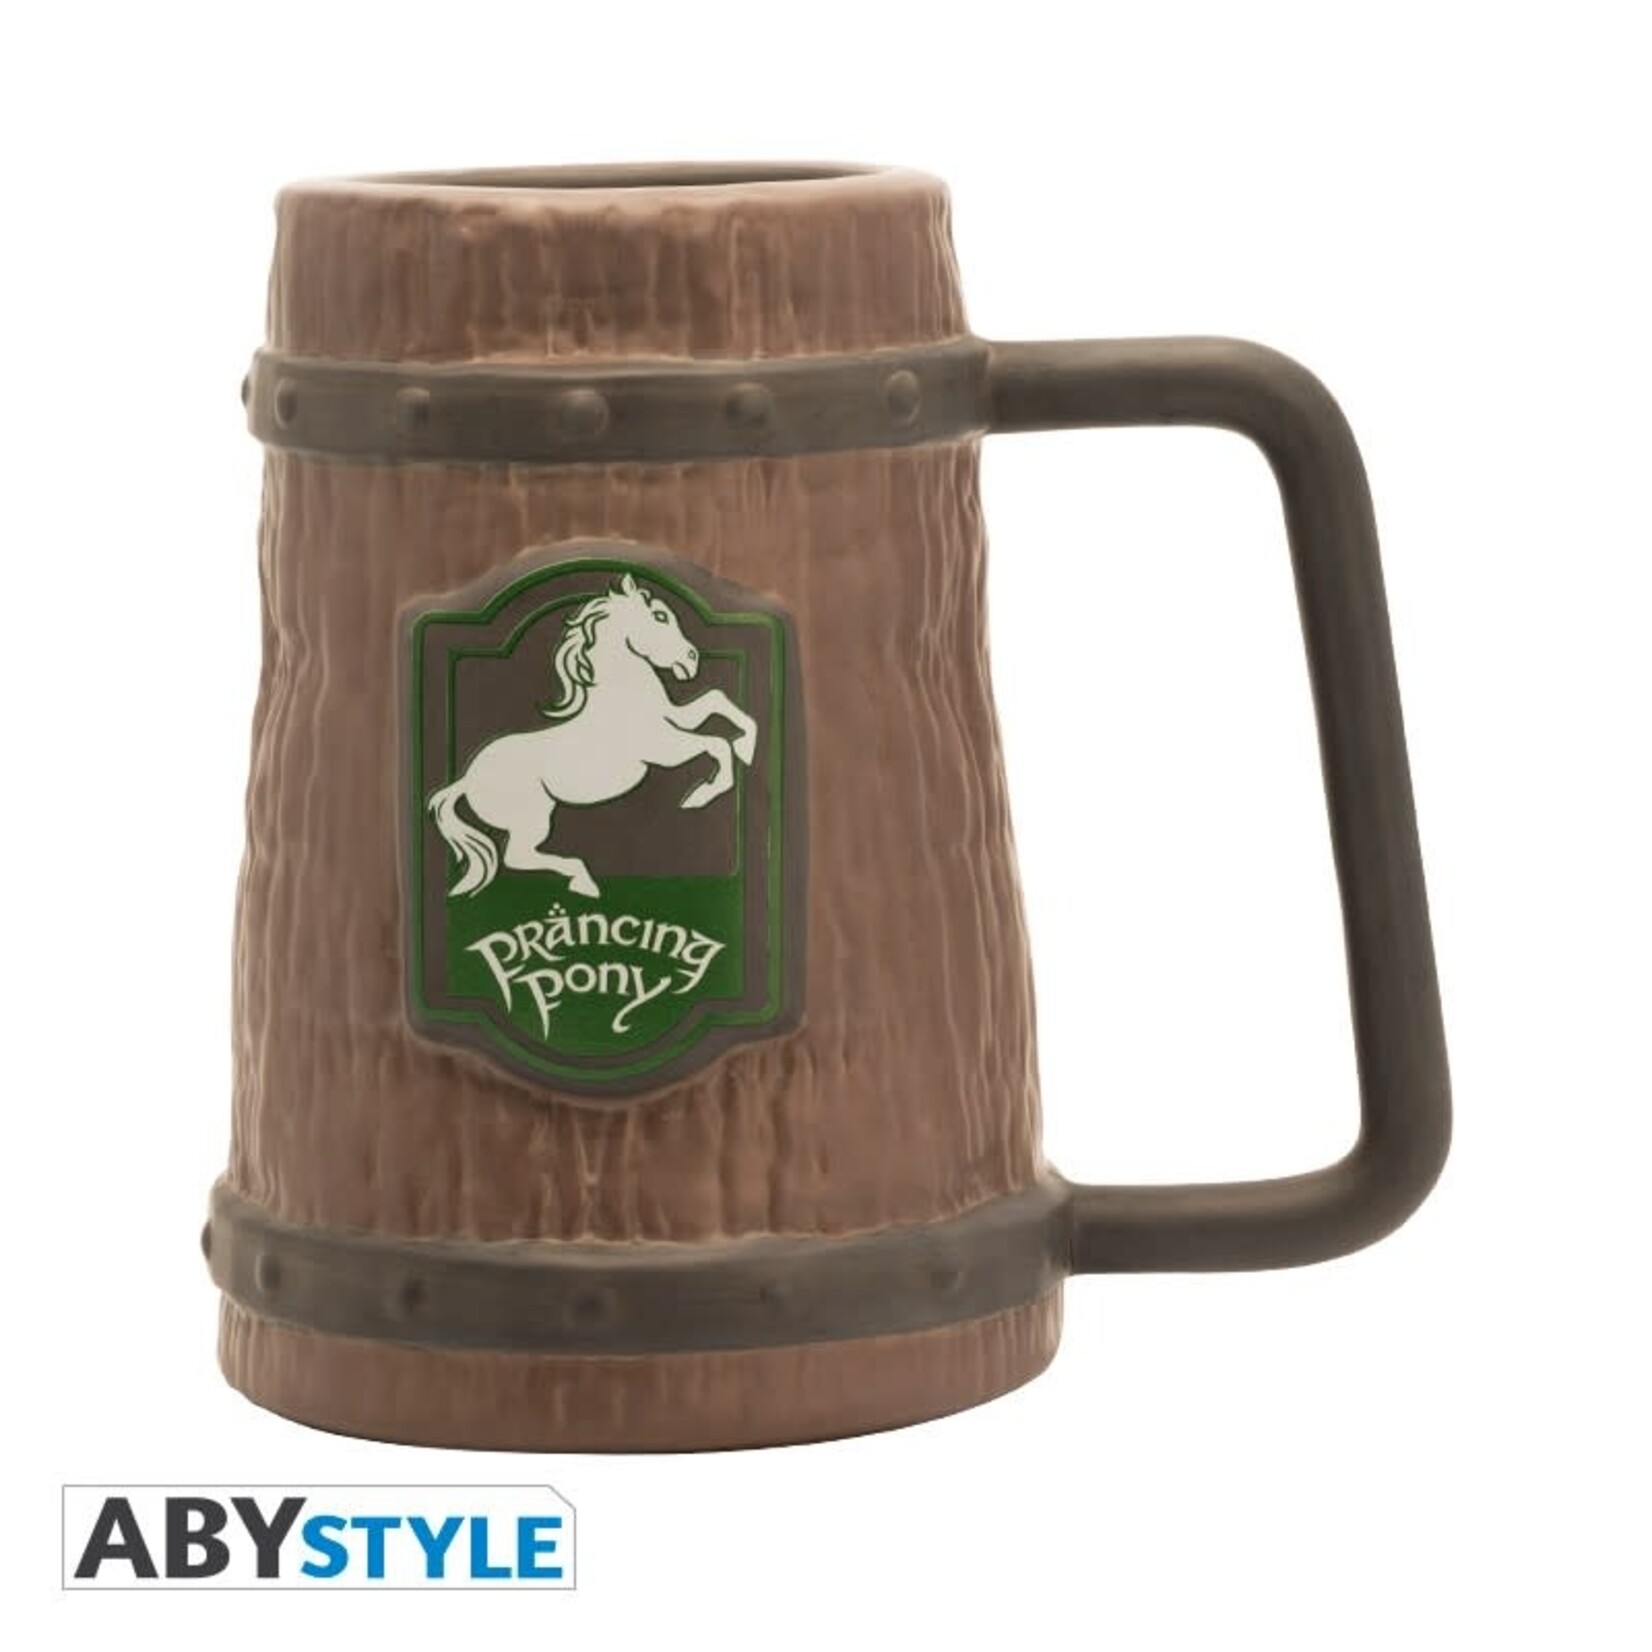 Abystyle LORD OF THE RINGS - Prancing Pony - Mug 450ml